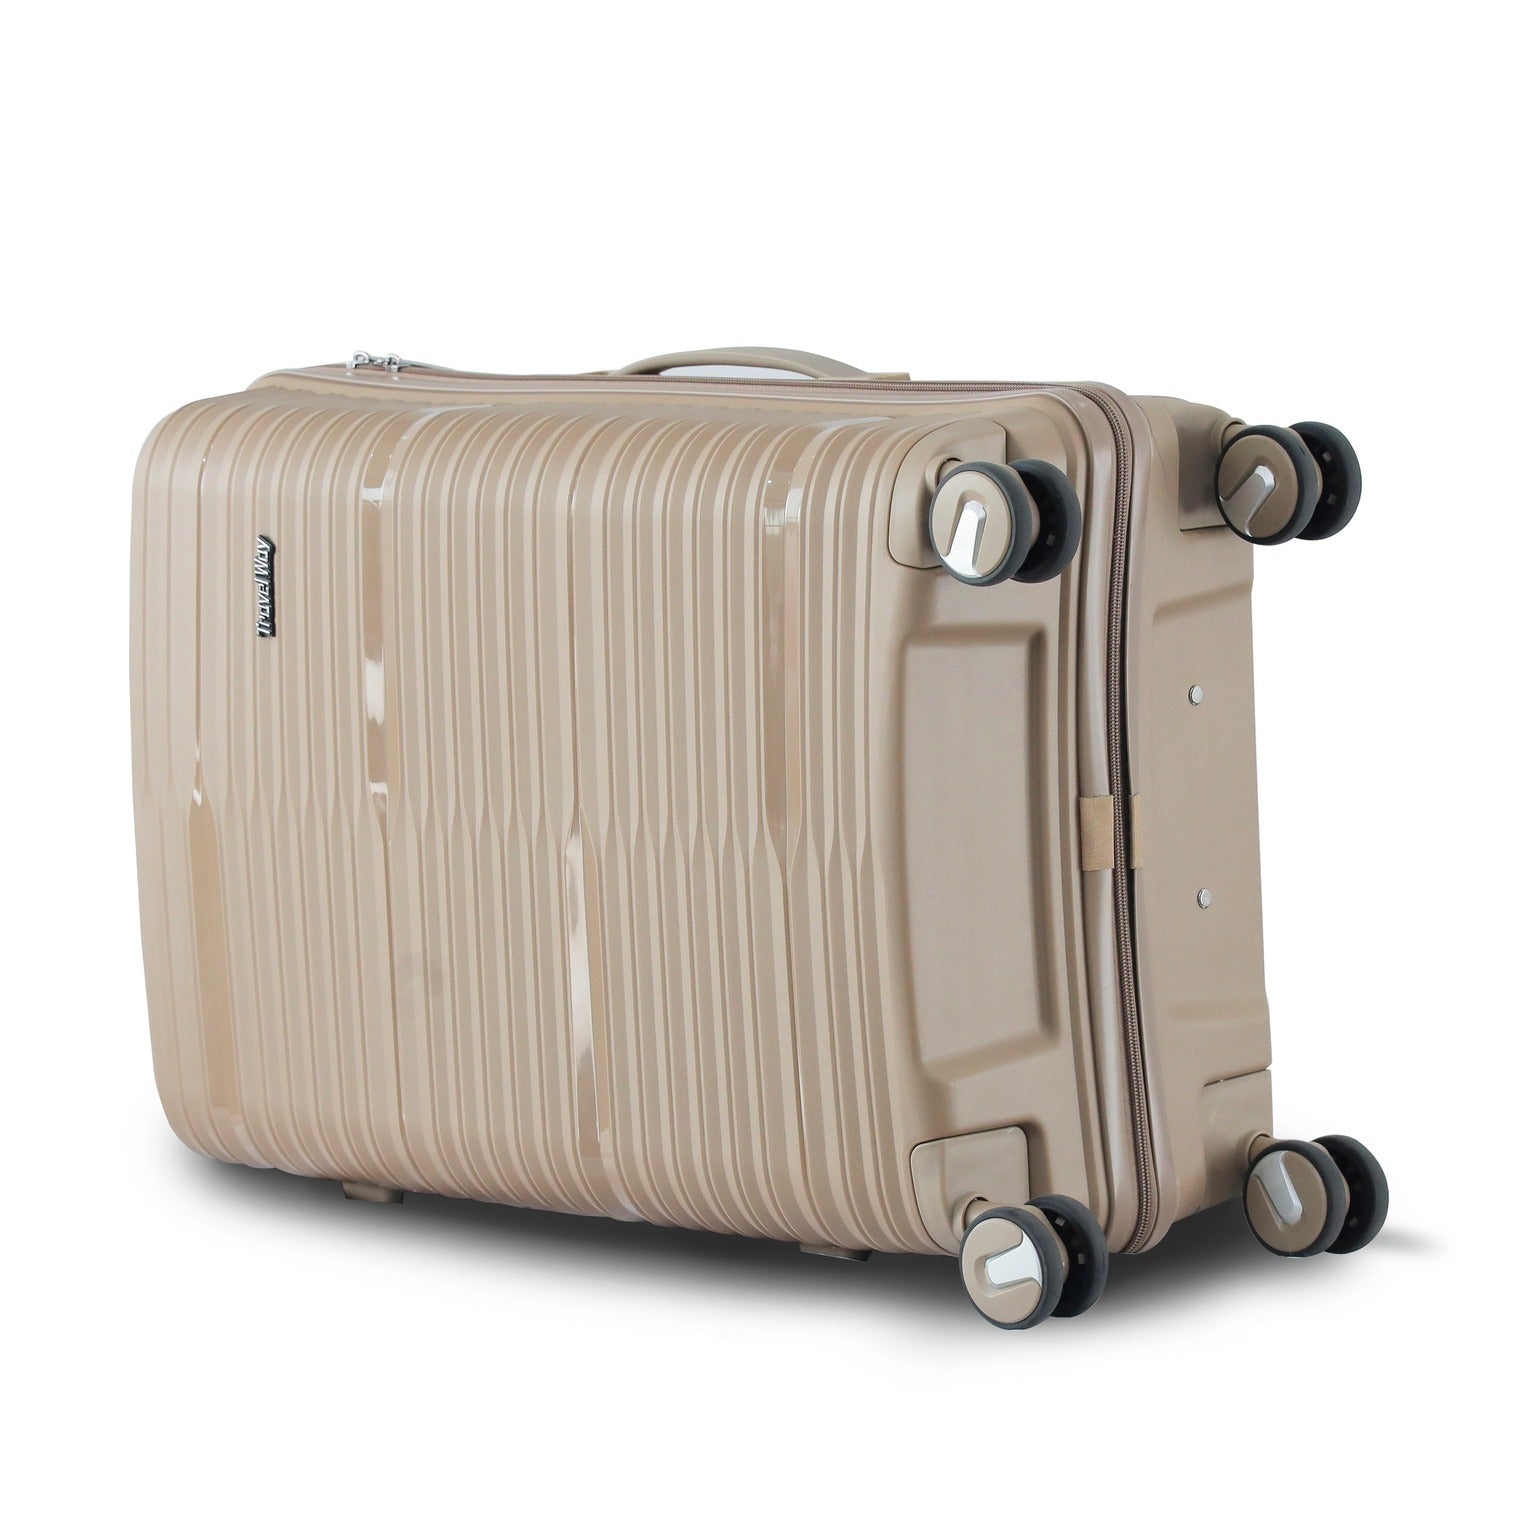  Khaki Colour Travel Way PP Unbreakable Luggage Bag with Double Spinner Wheel Zaappy